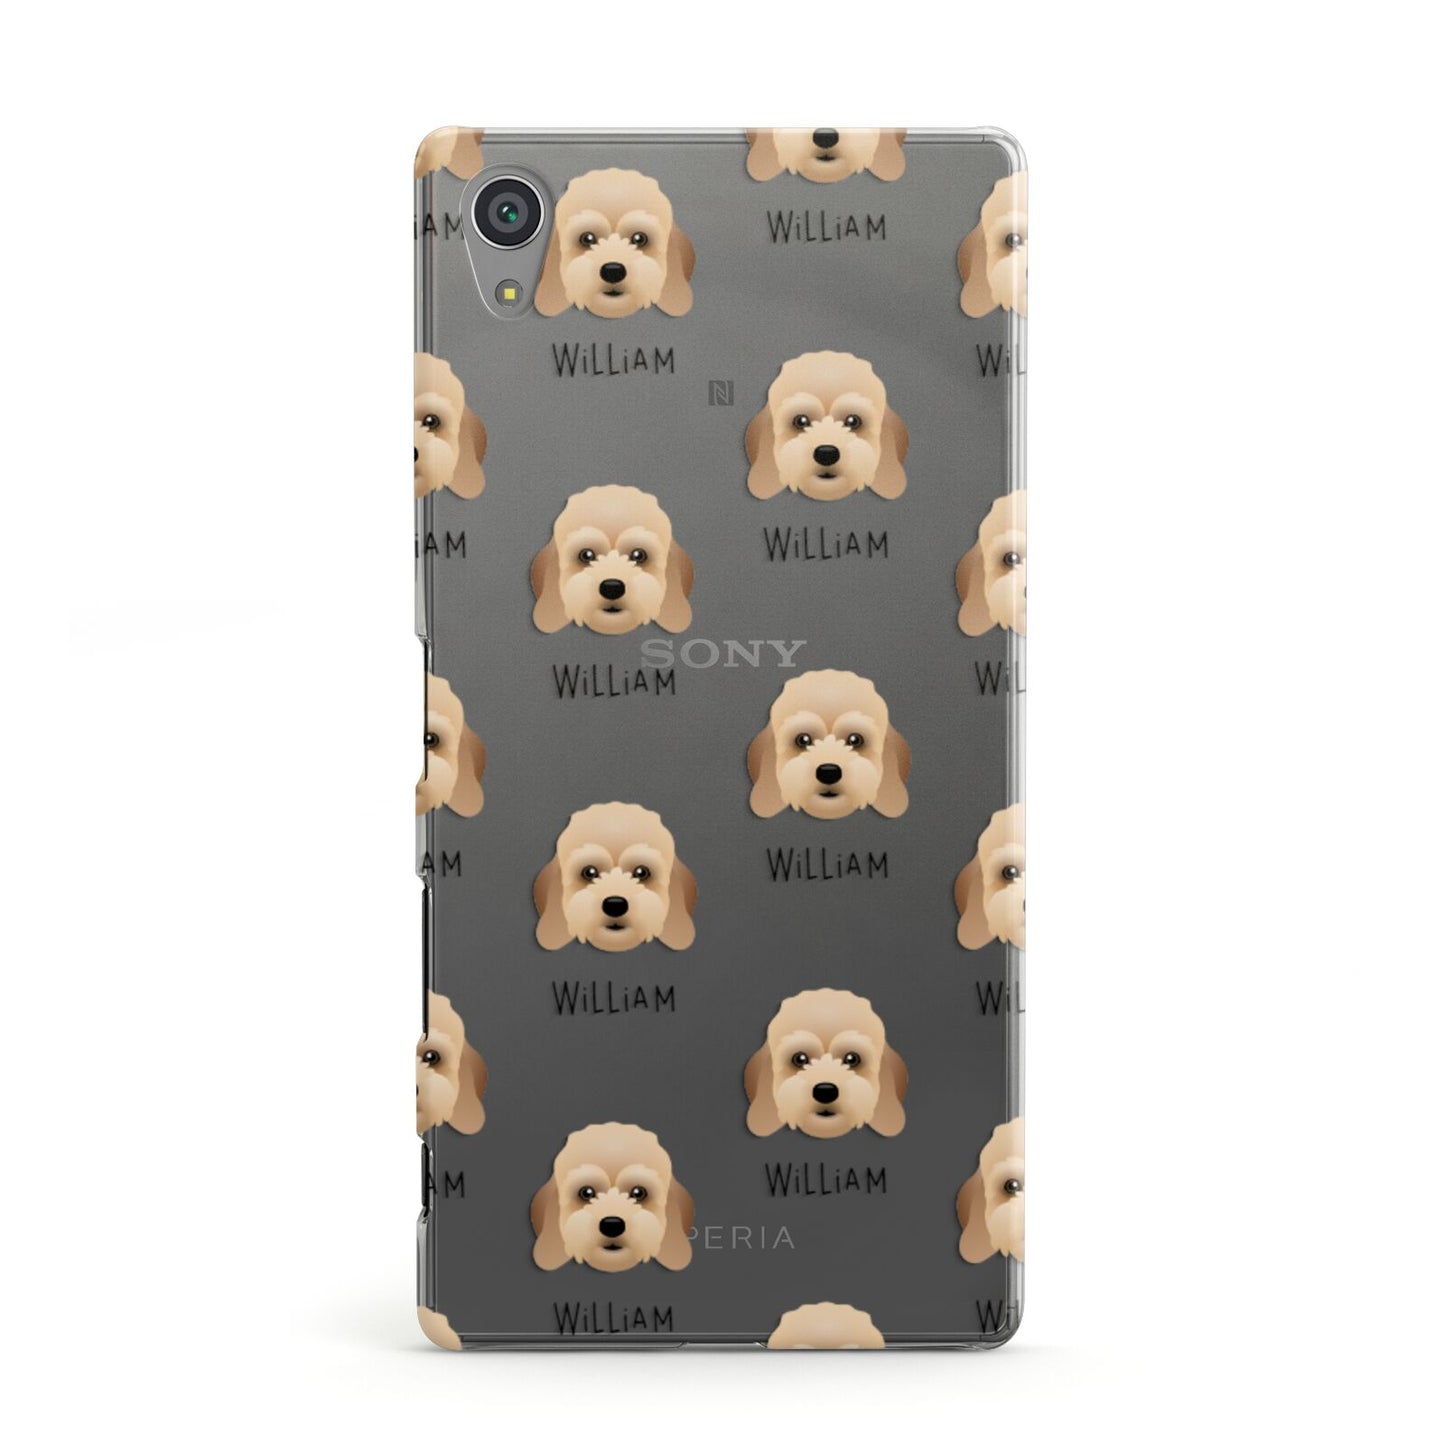 Lhasapoo Icon with Name Sony Xperia Case